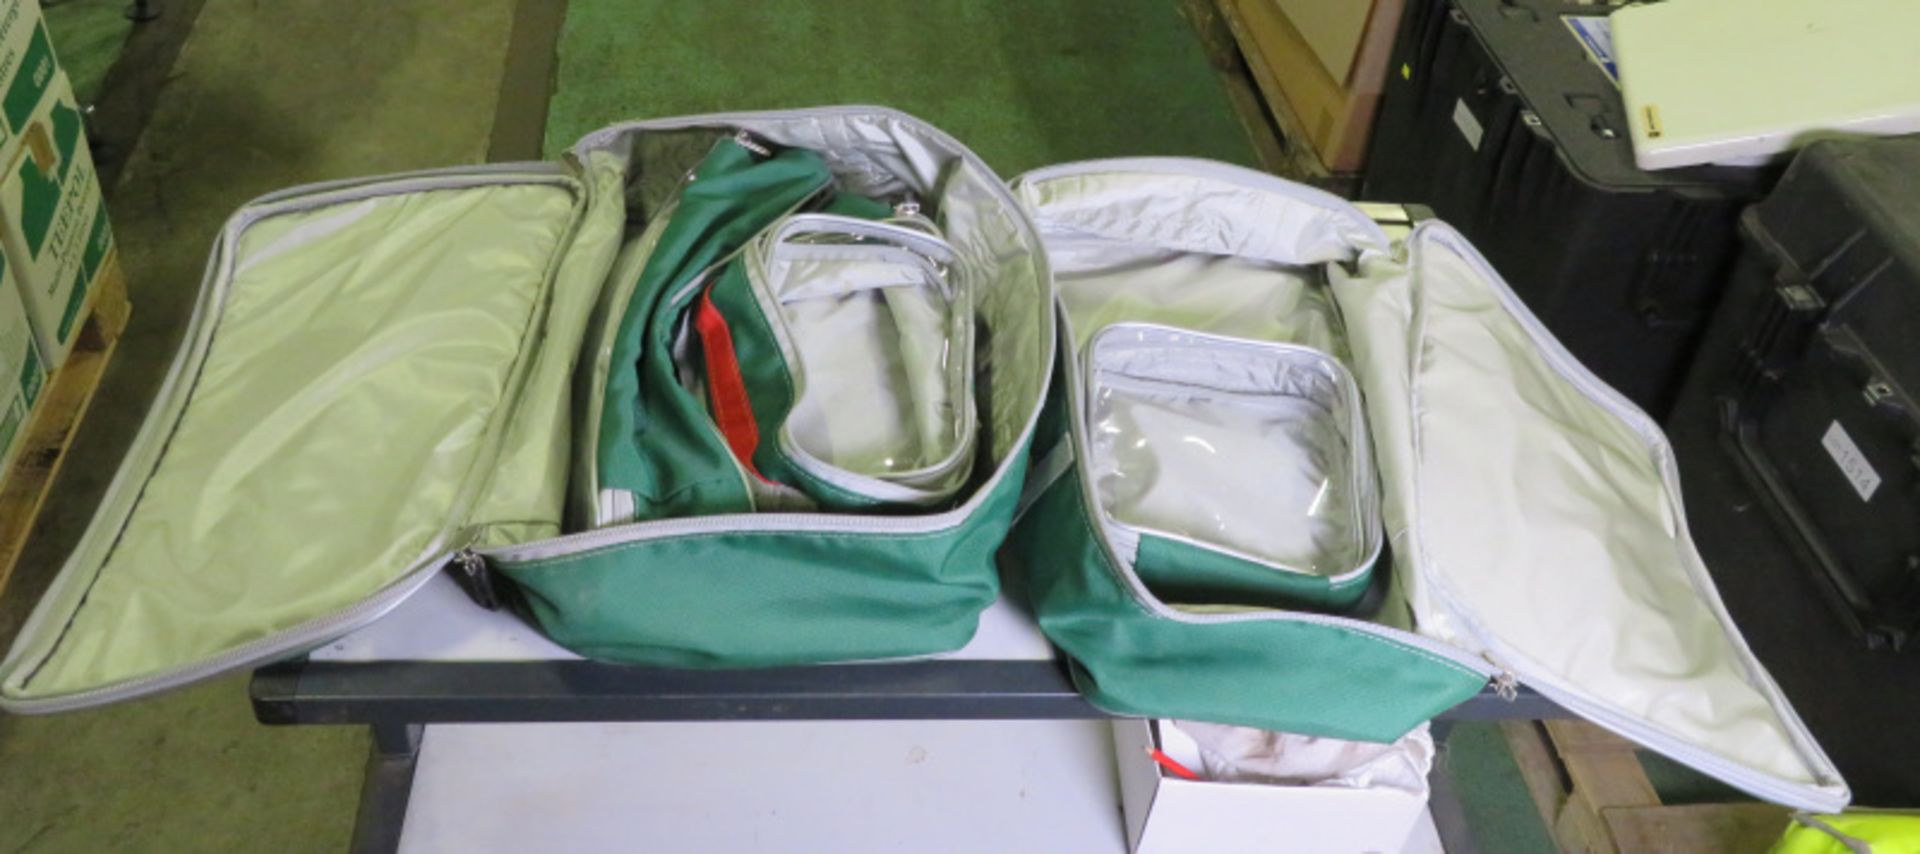 4x Cycle Response Unit First Aid Bags - Image 5 of 5